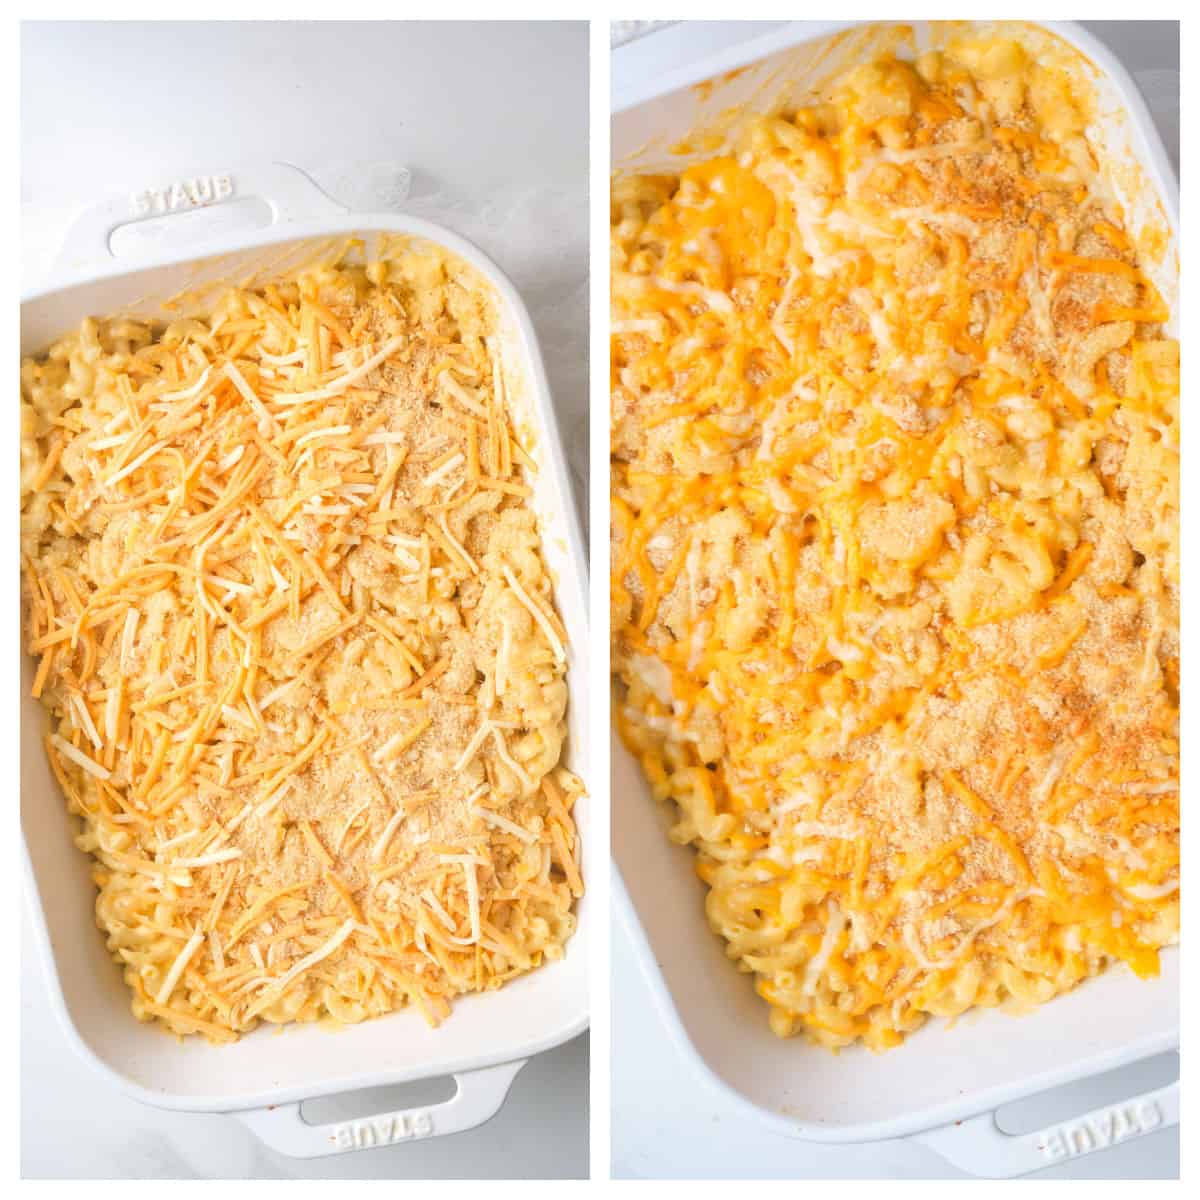 Unbaked and baked mac and cheese.